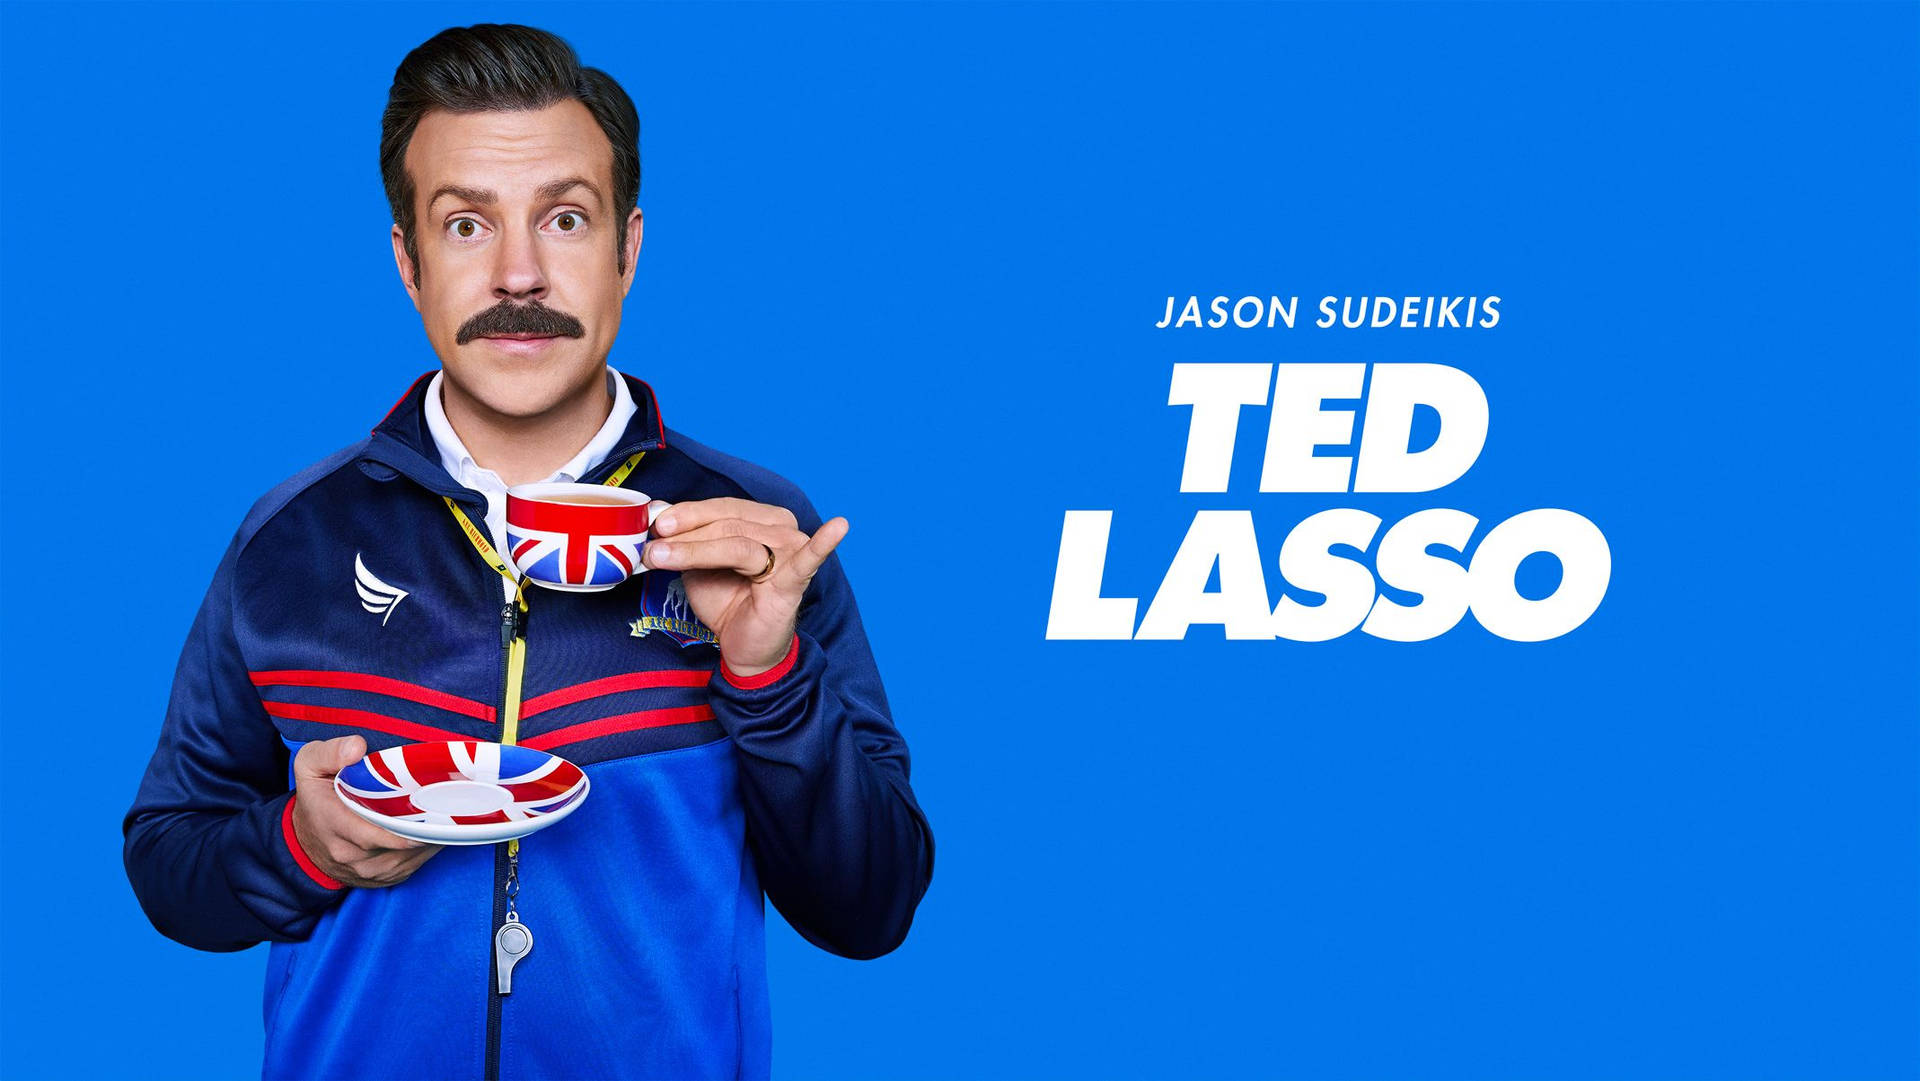 Ted Lasso Pictures